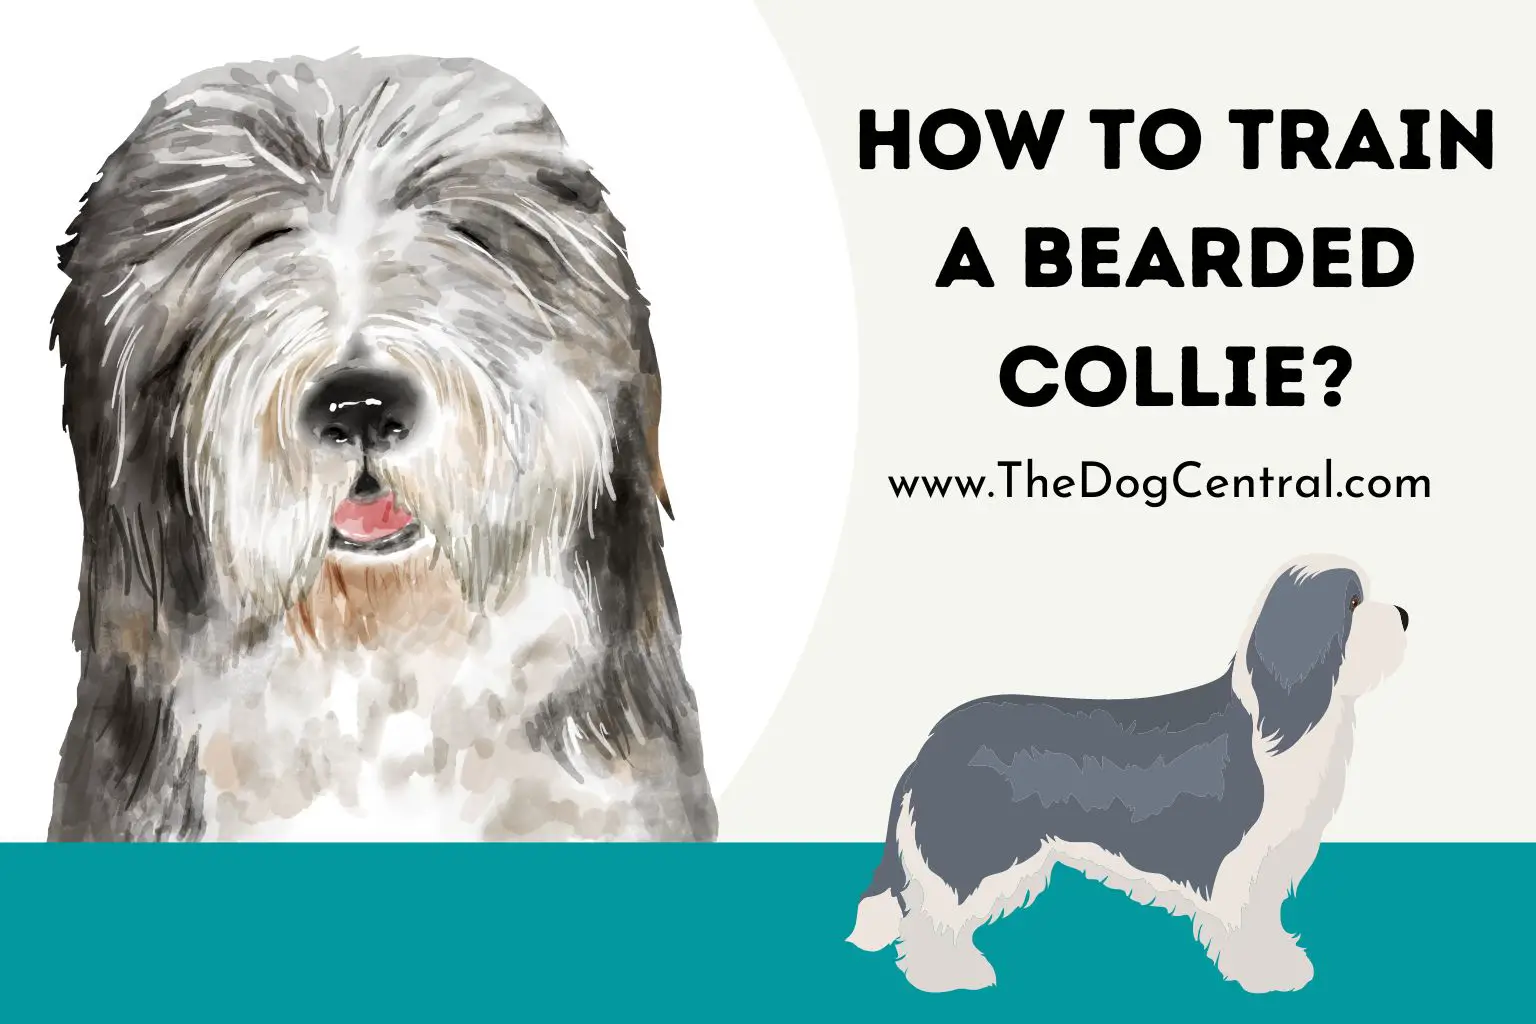 How to Train a Bearded Collie